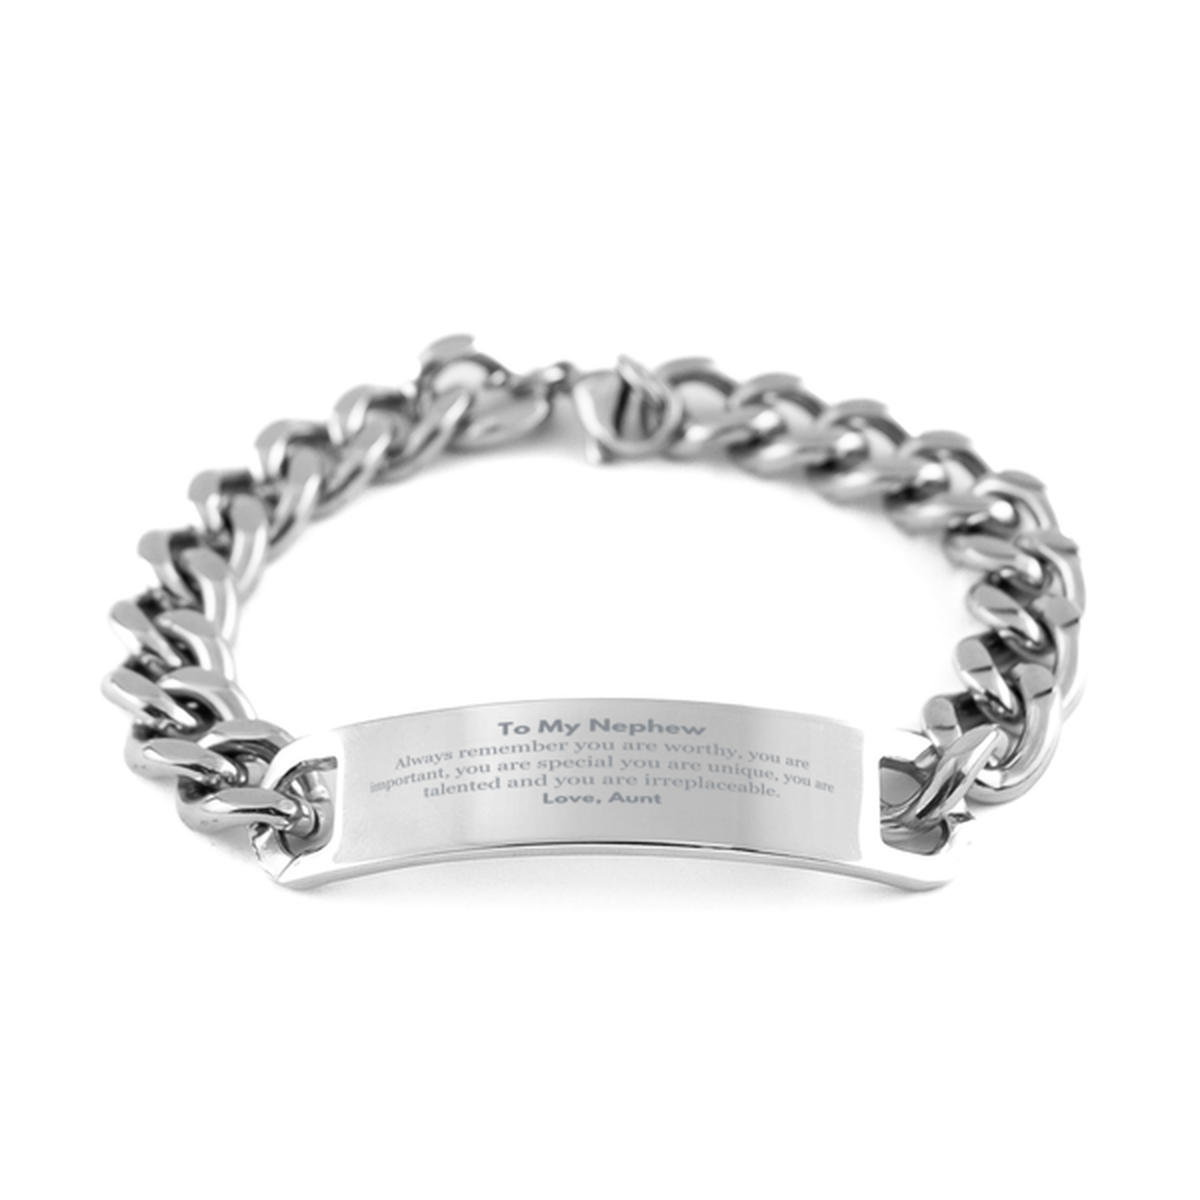 Nephew Birthday Gifts from Aunt, Inspirational Cuban Chain Stainless Steel Bracelet for Nephew Christmas Graduation Gifts for Nephew Always remember you are worthy, you are important. Love, Aunt